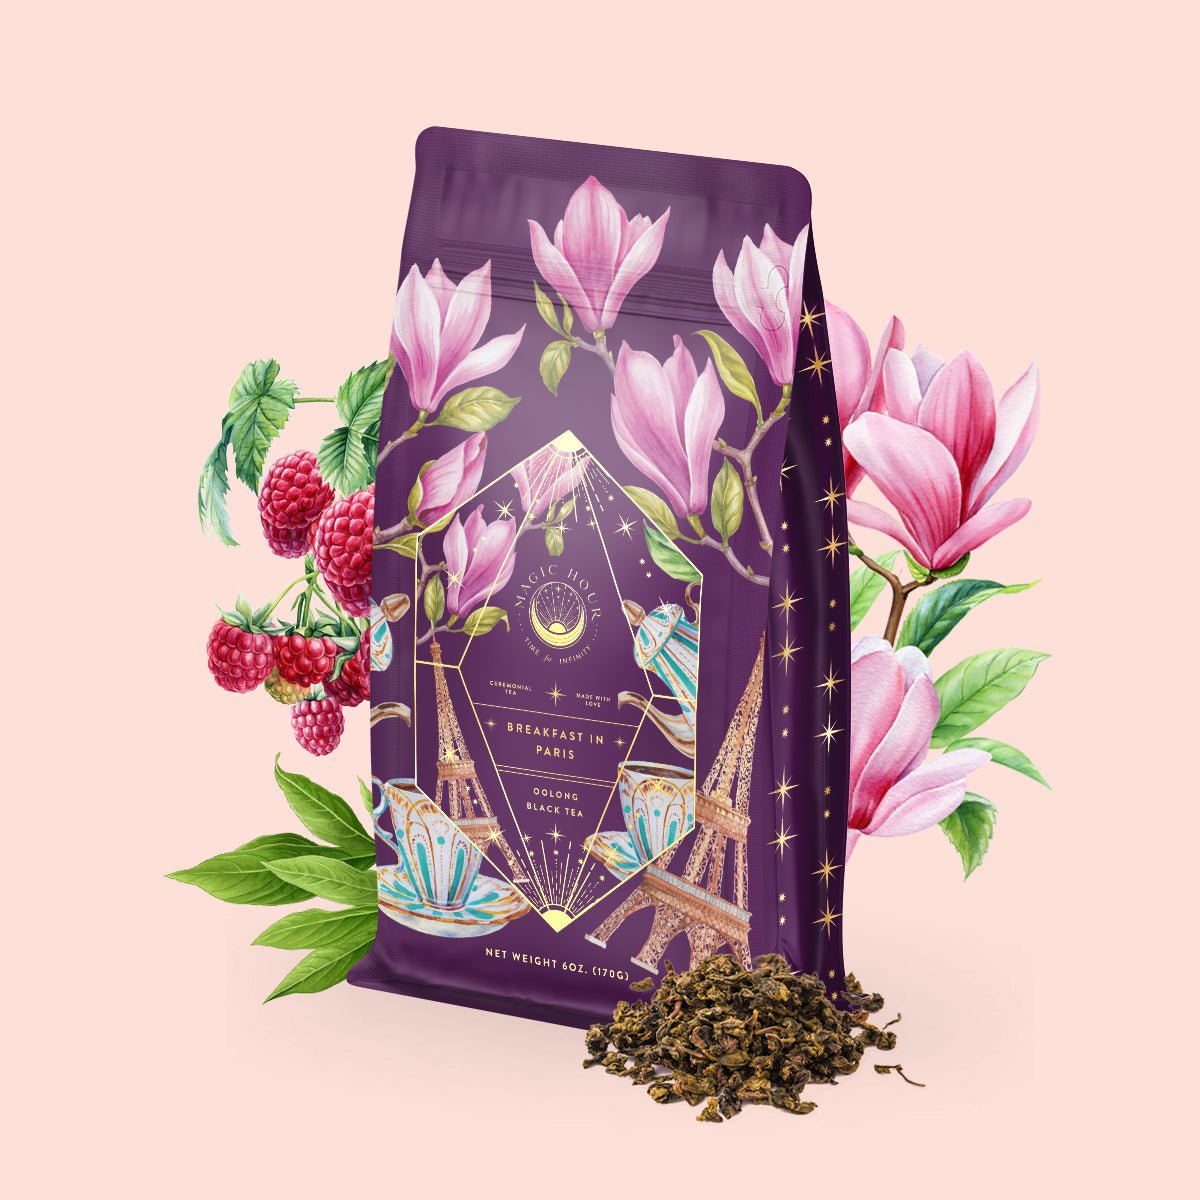 Breakfast in Paris Oolong Black Tea Refill Pouch-Luxe Refill Pouch (Up to 75 Cups)-Magic Hour